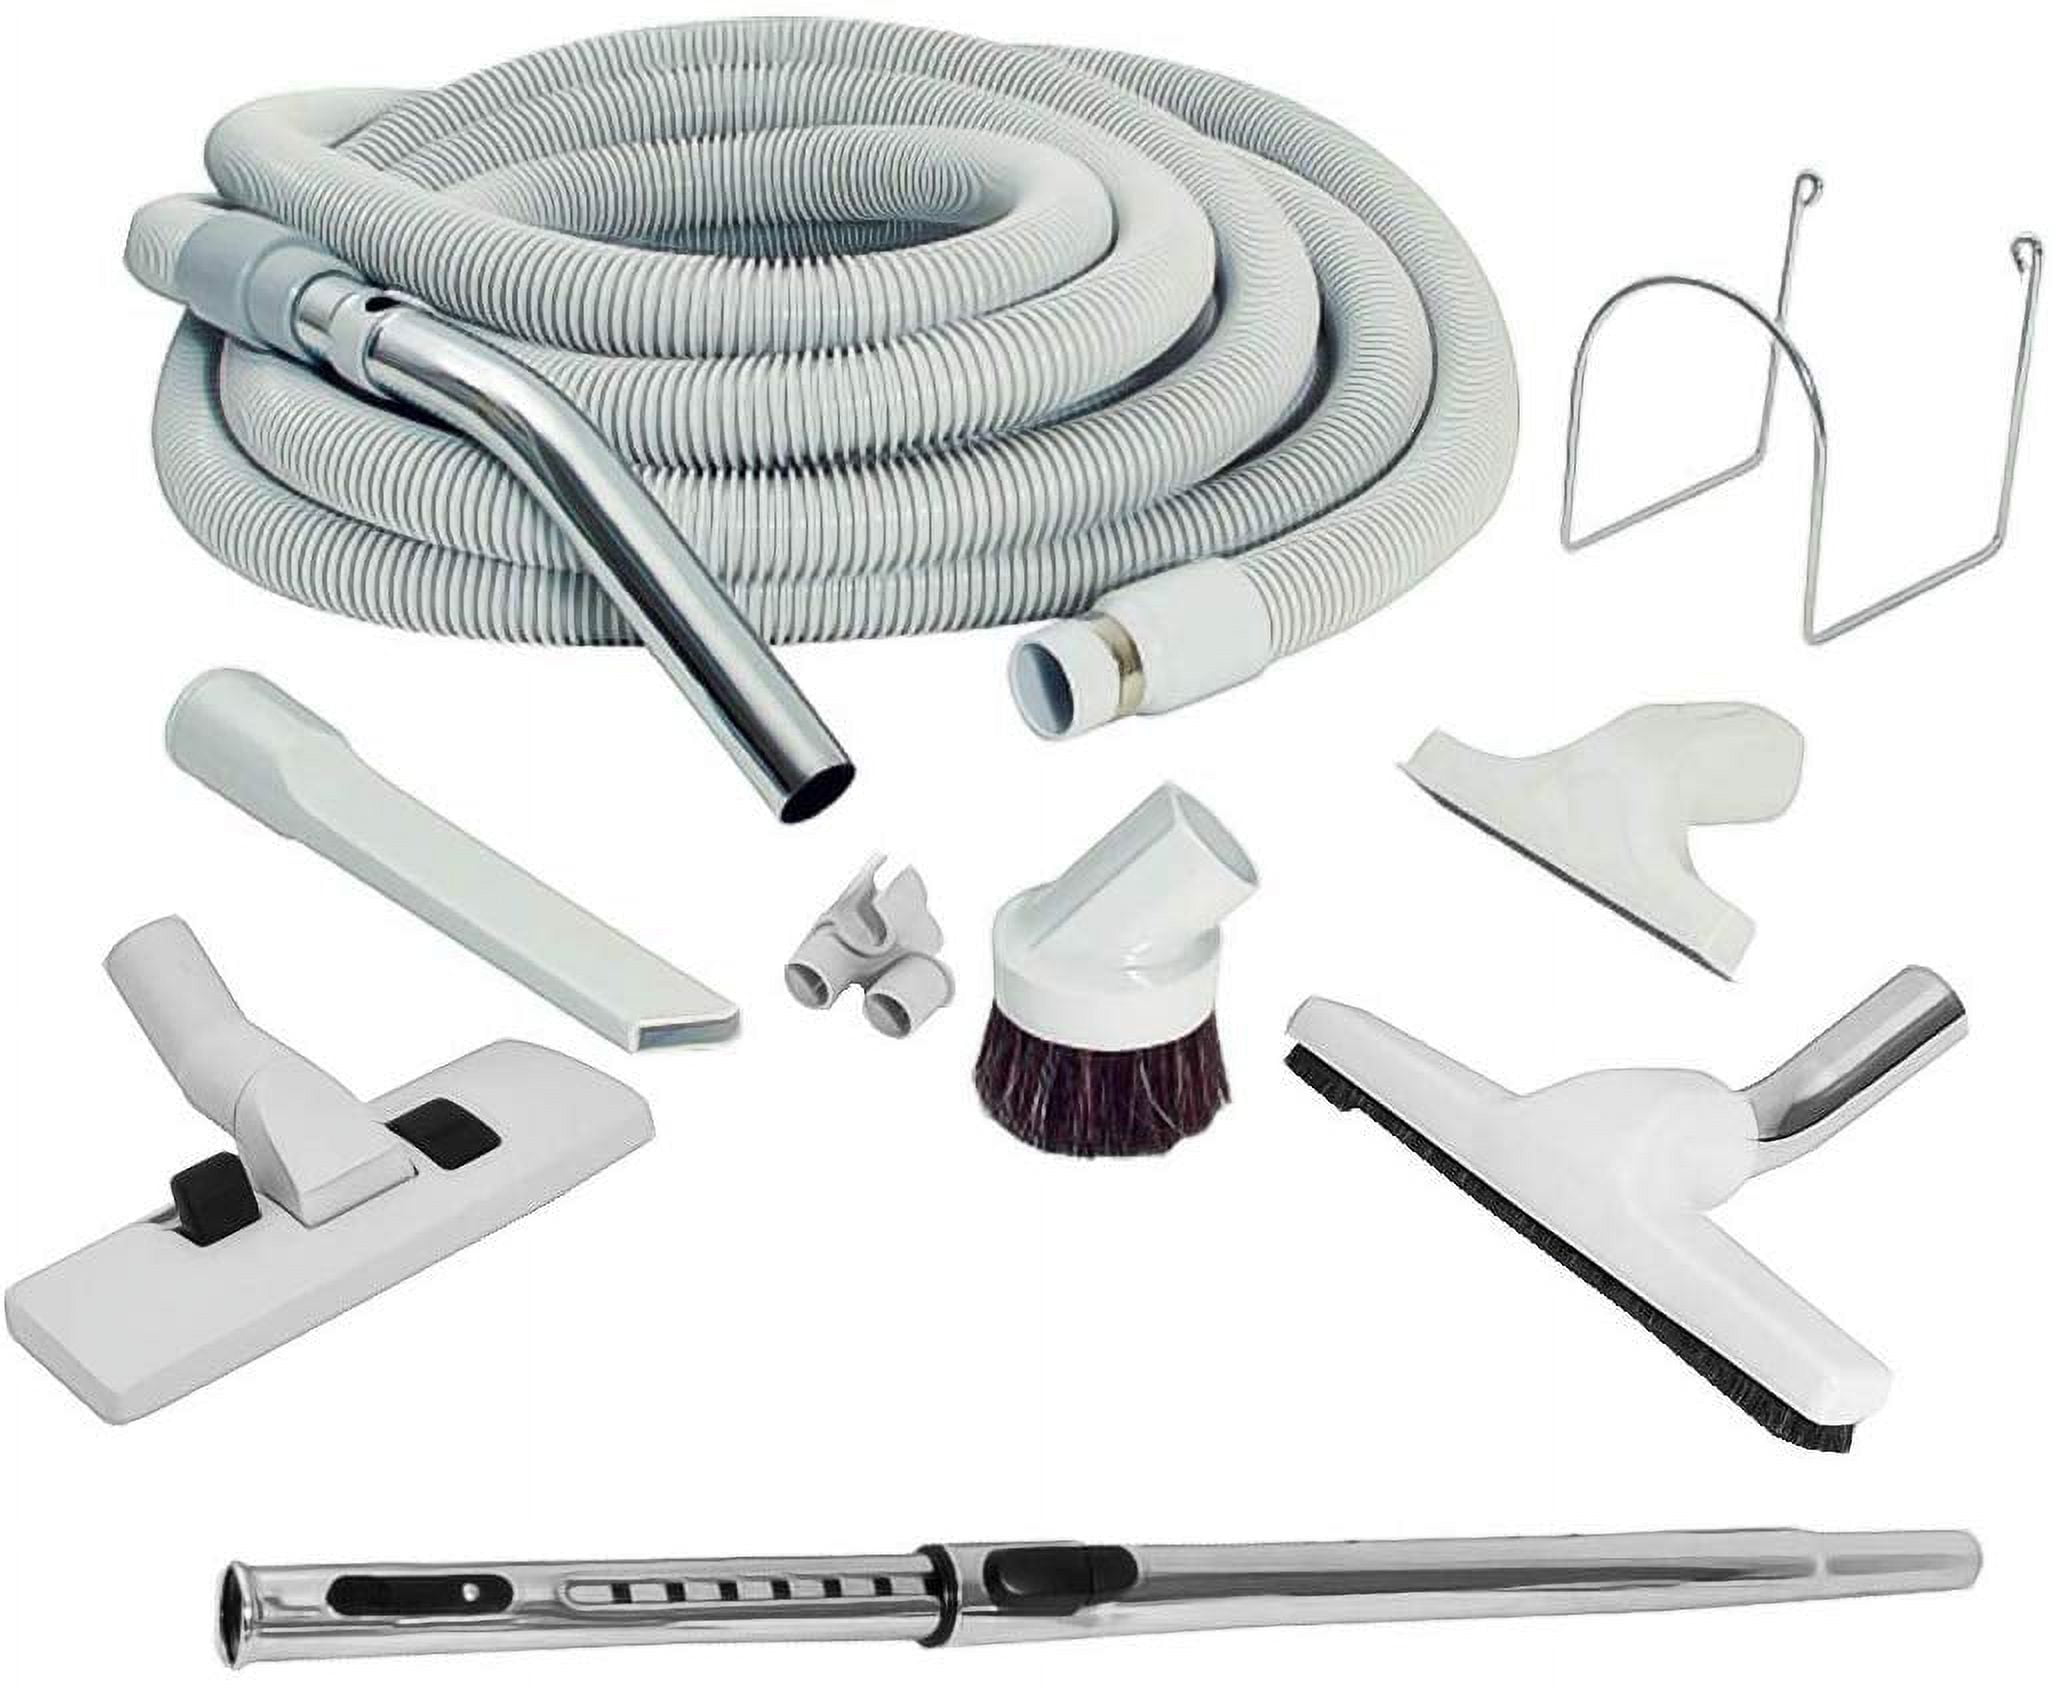 Cen-Tec All Things Crevice Universal Accessory Kit for Vacuum Cleaners